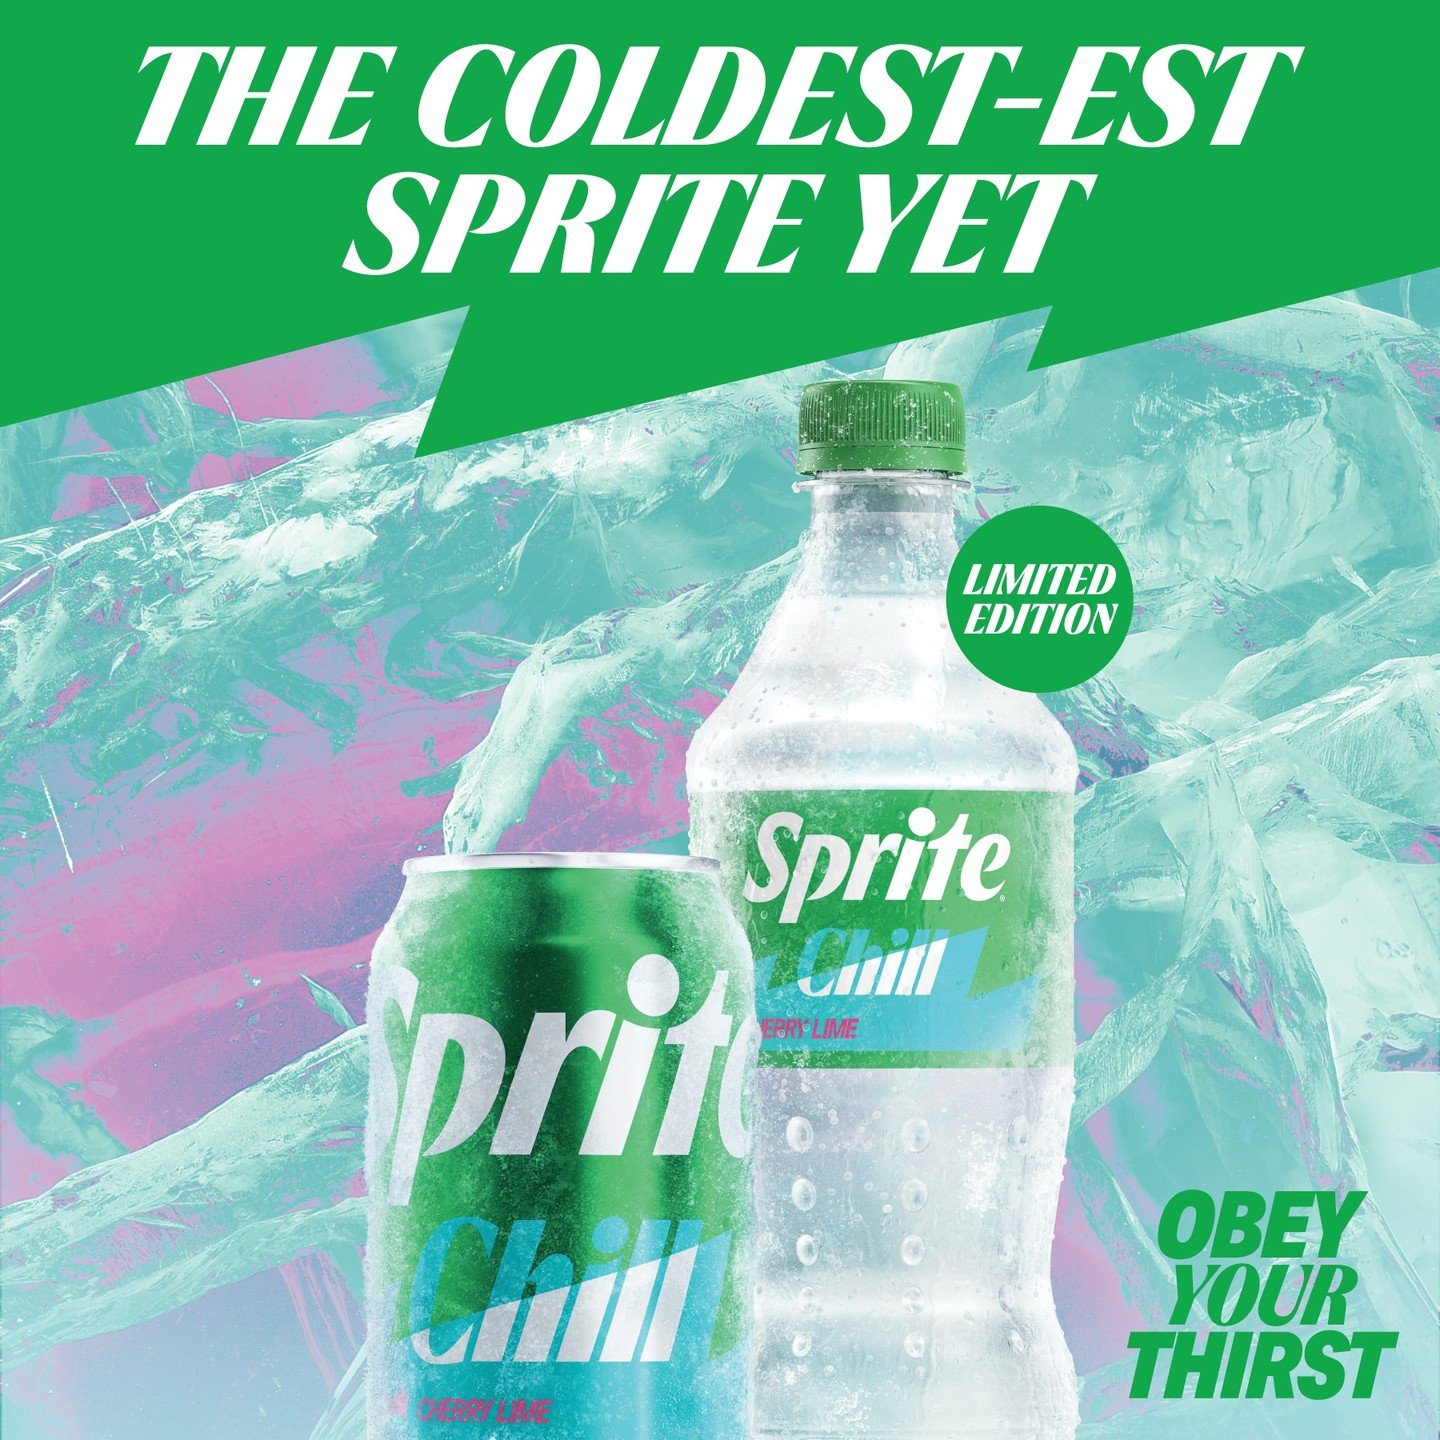 Introducing new, limited-edition Sprite Chill: the coldest-est lemon-lime flavored soda in the game, featuring a cherry lime taste and a unique cooling effect. It&rsquo;s the cut-through refreshment you love from Sprite with an unexpectedly cold expe